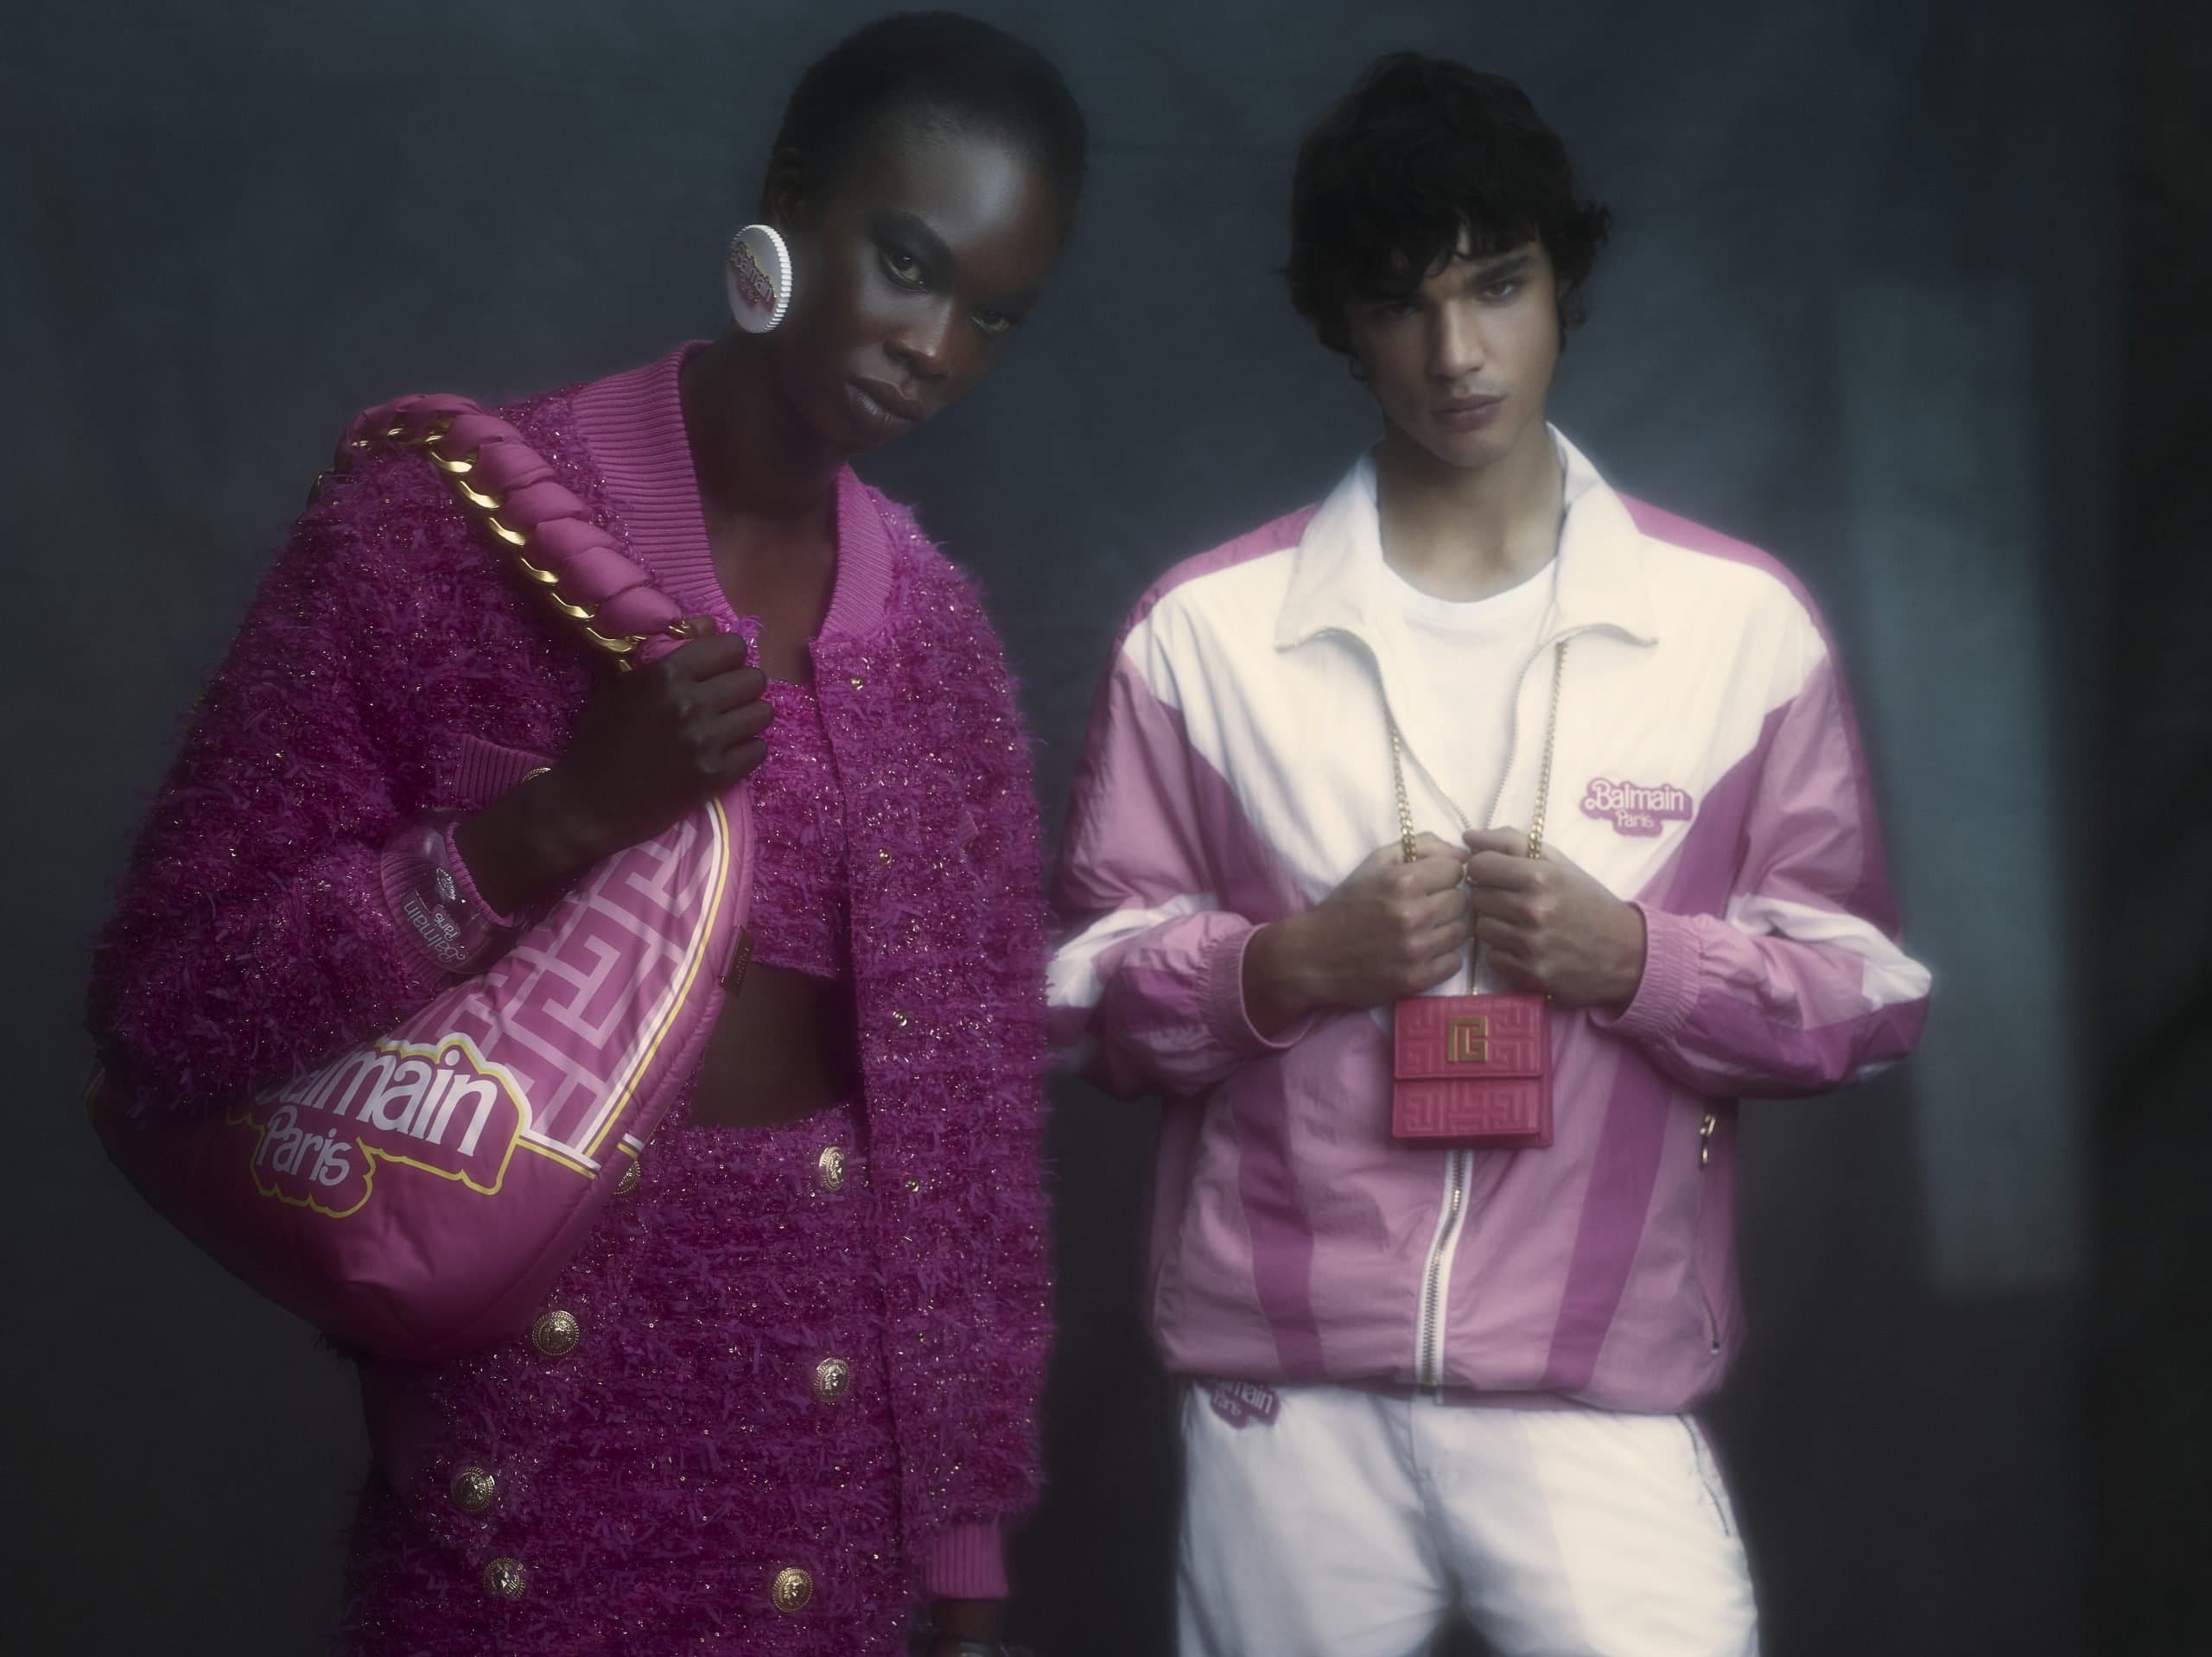 Photograph of two models wearing the clothes from the Barbie x Balmain collection